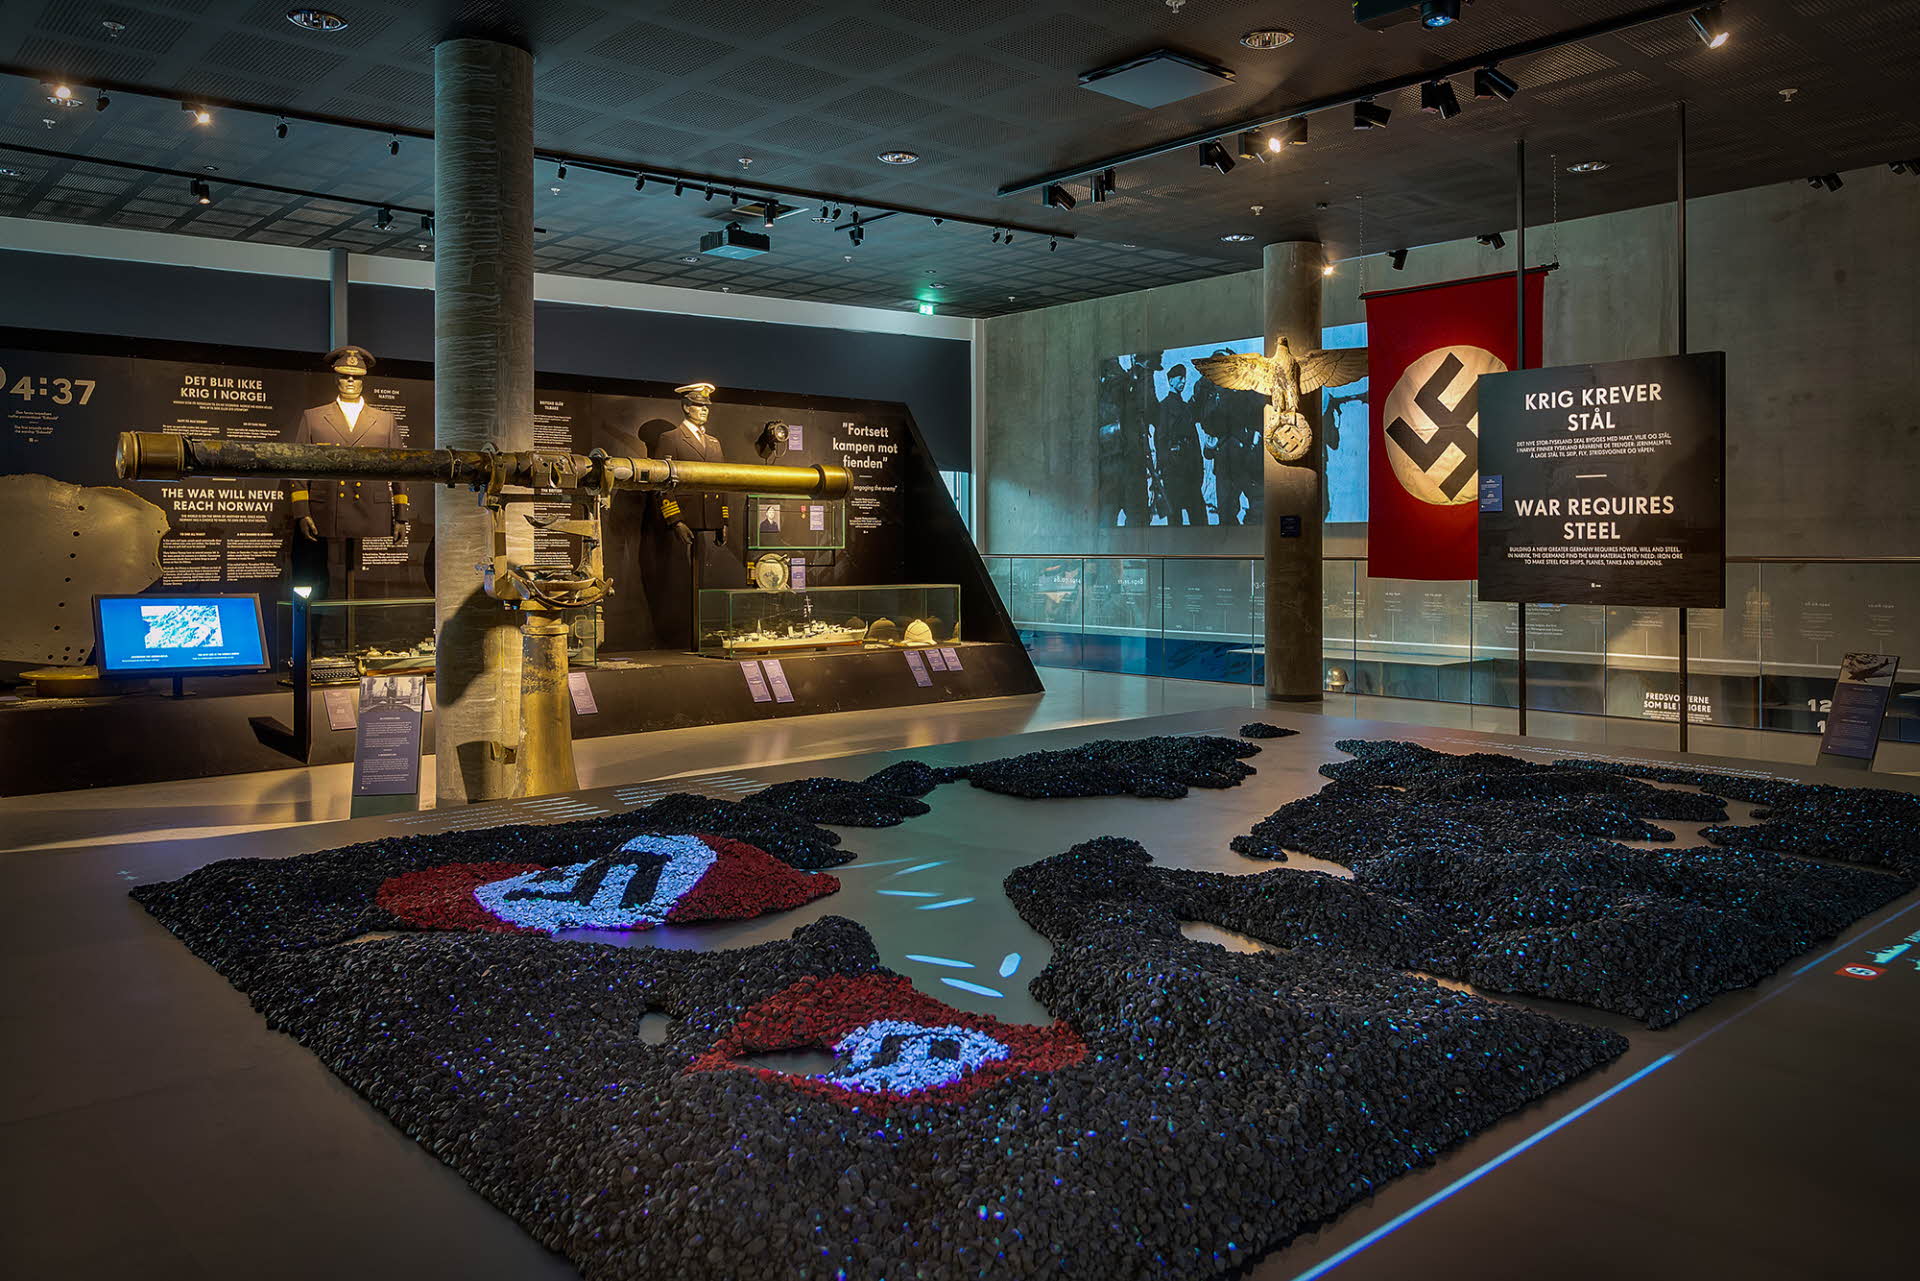 Exhibition at Narvik War Museum.